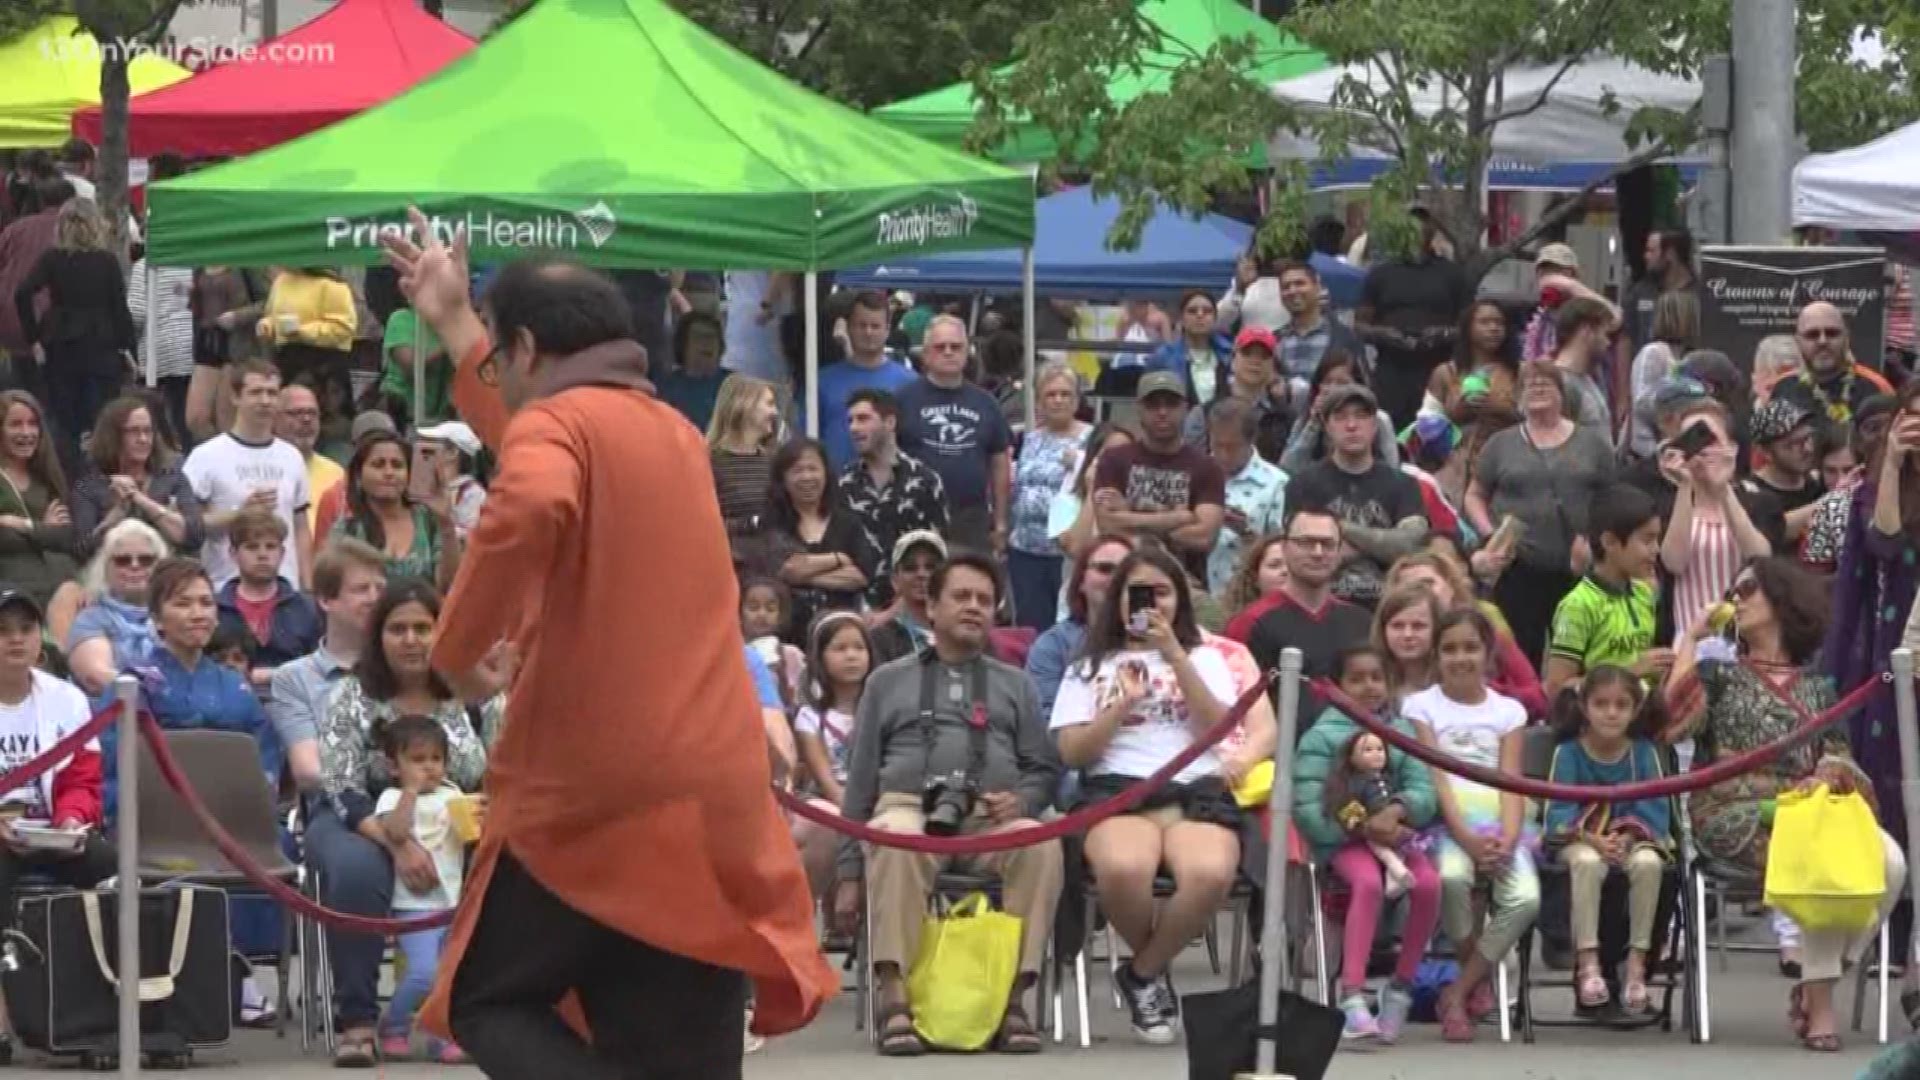 The festival is returning to Grand Rapids tomorrow, with some new events and activities.